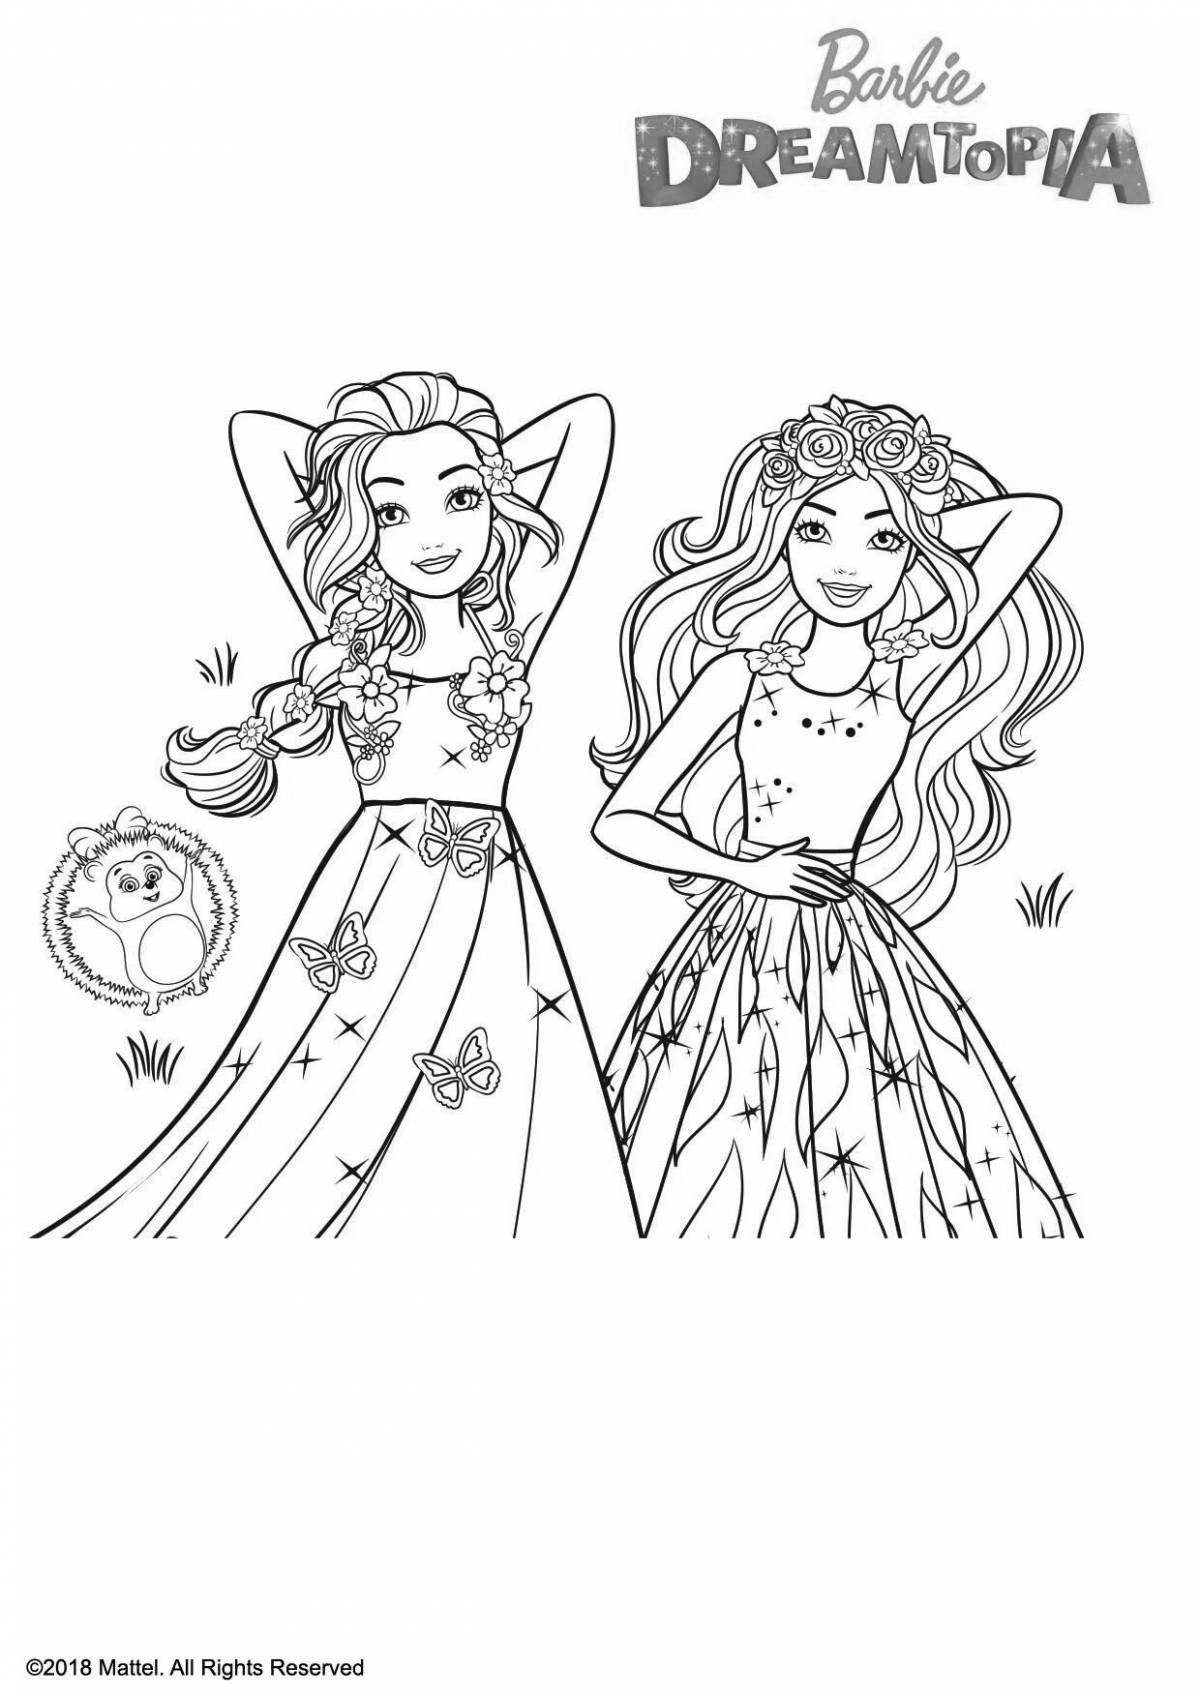 Fine Chelsea doll coloring page